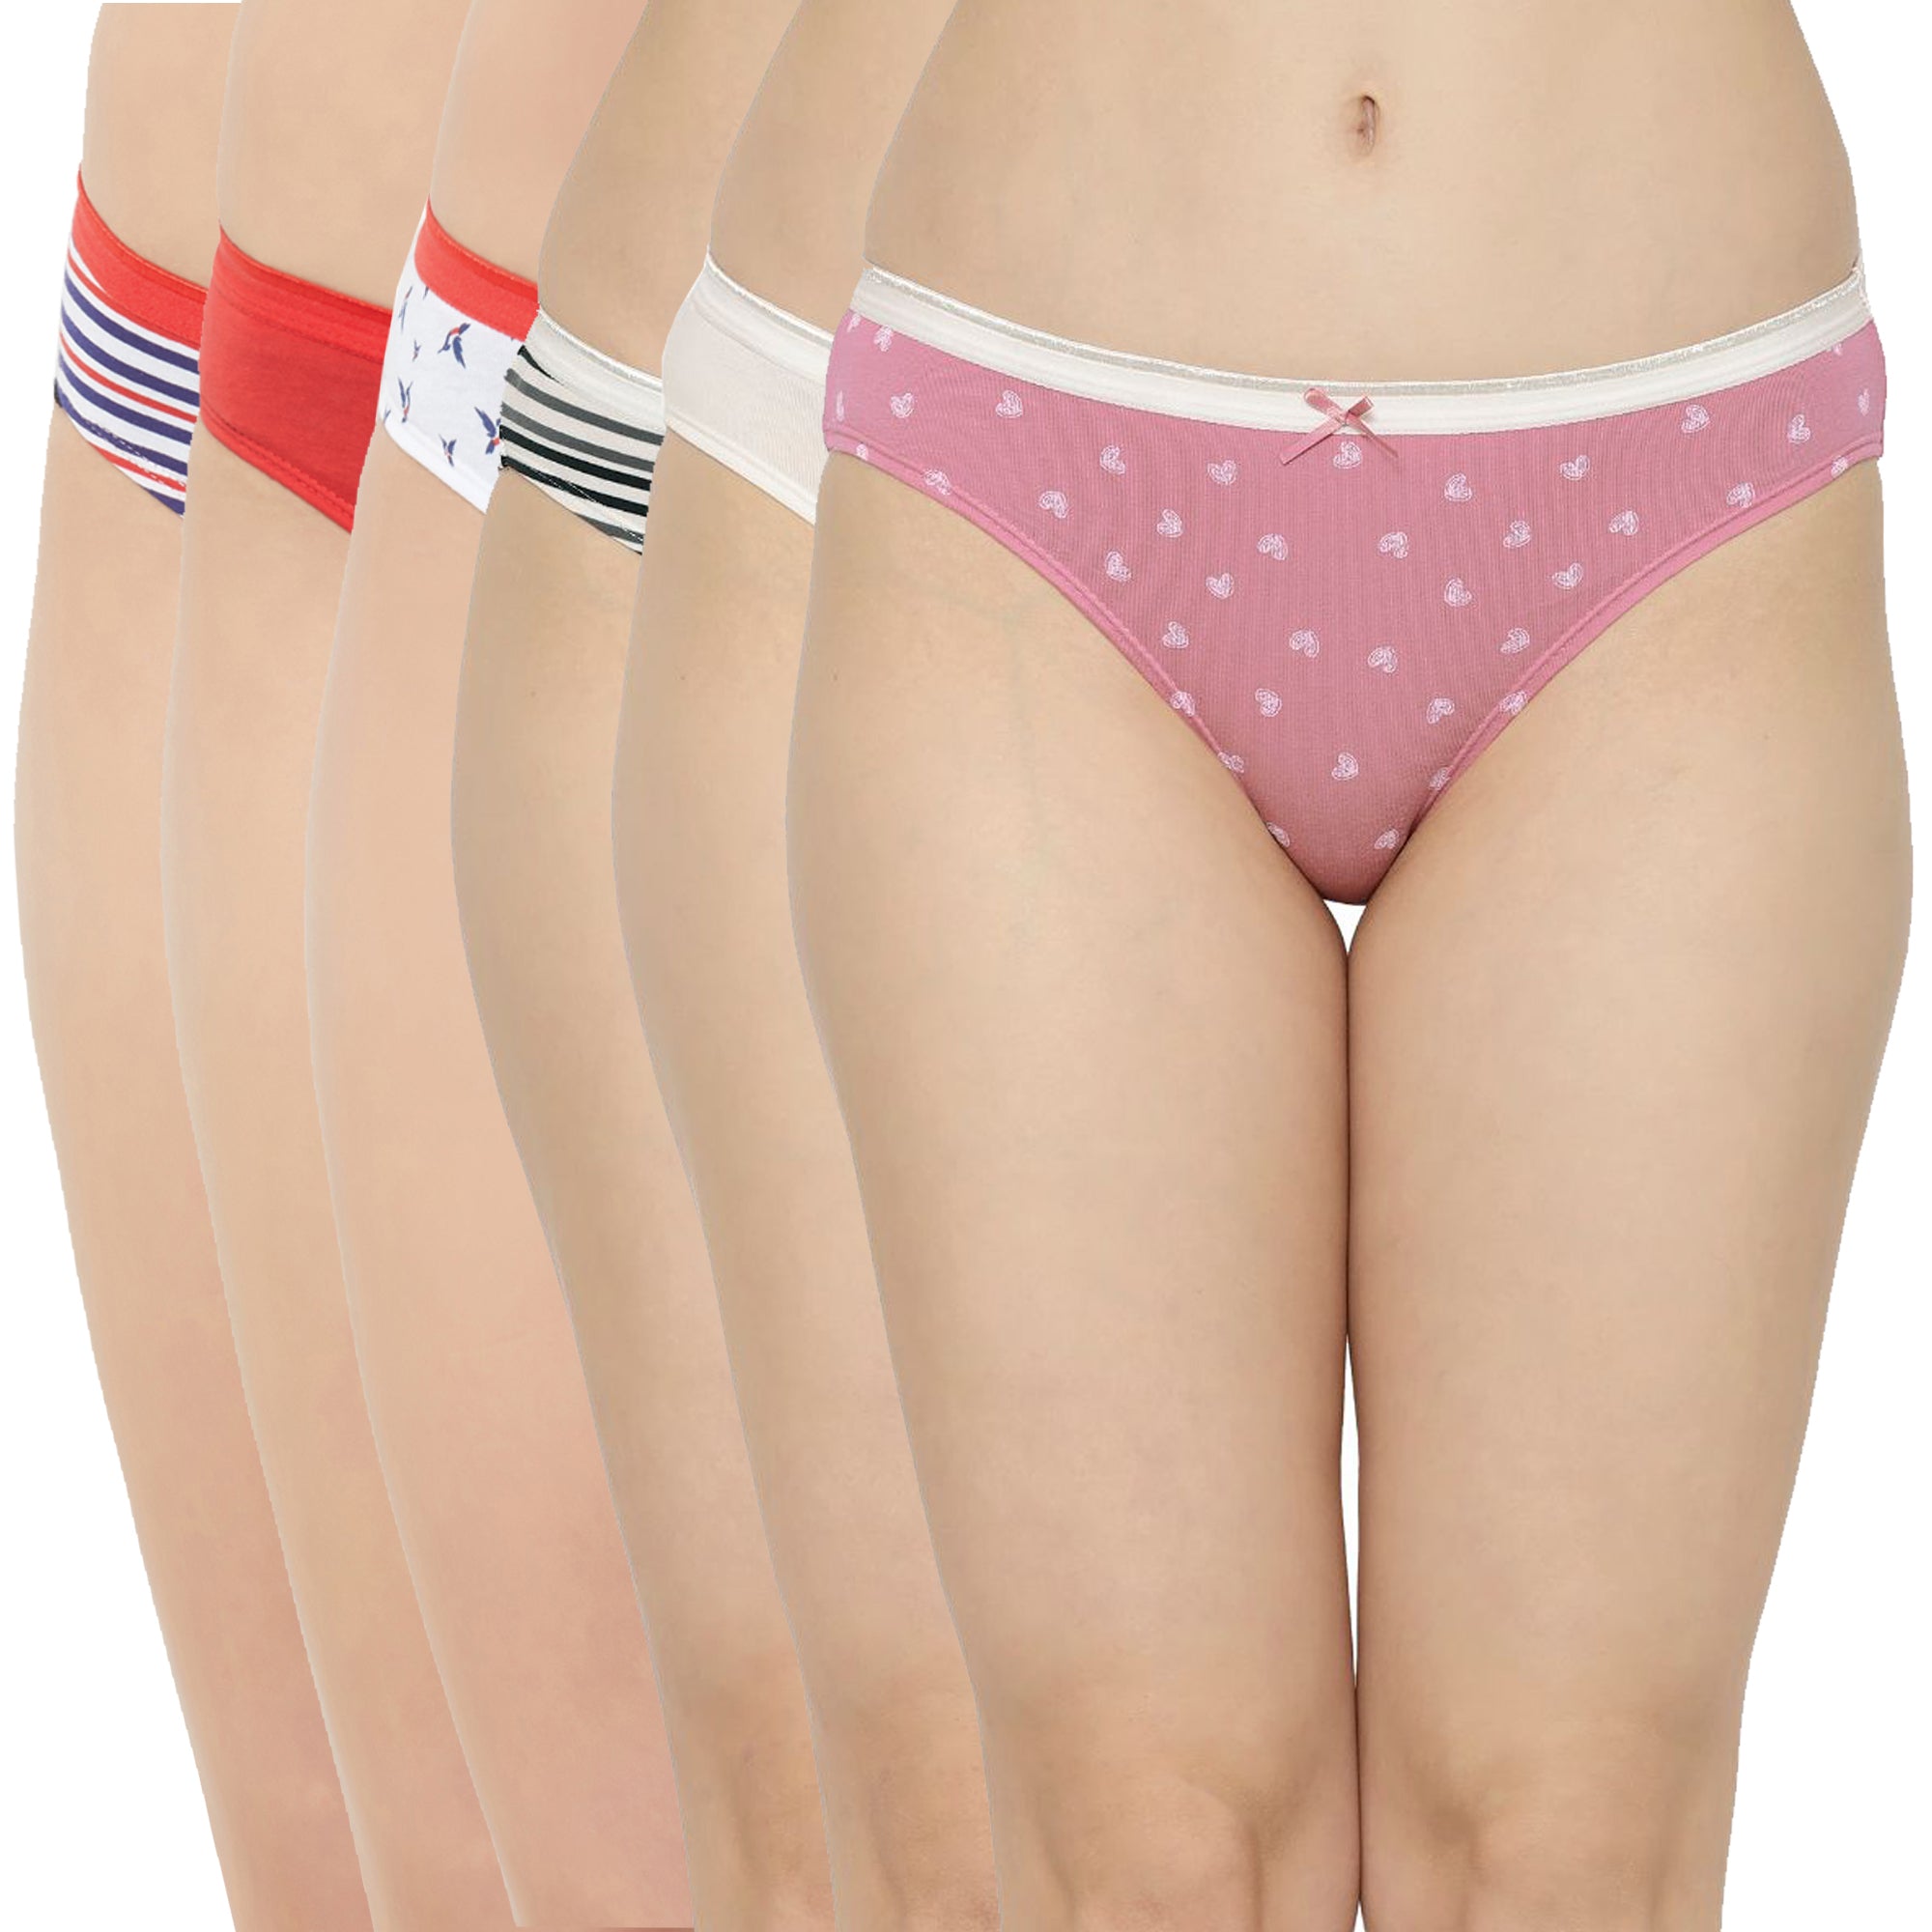 Buy QOXOLYZ Women's Cotton Panty For Women Daily Use Combo